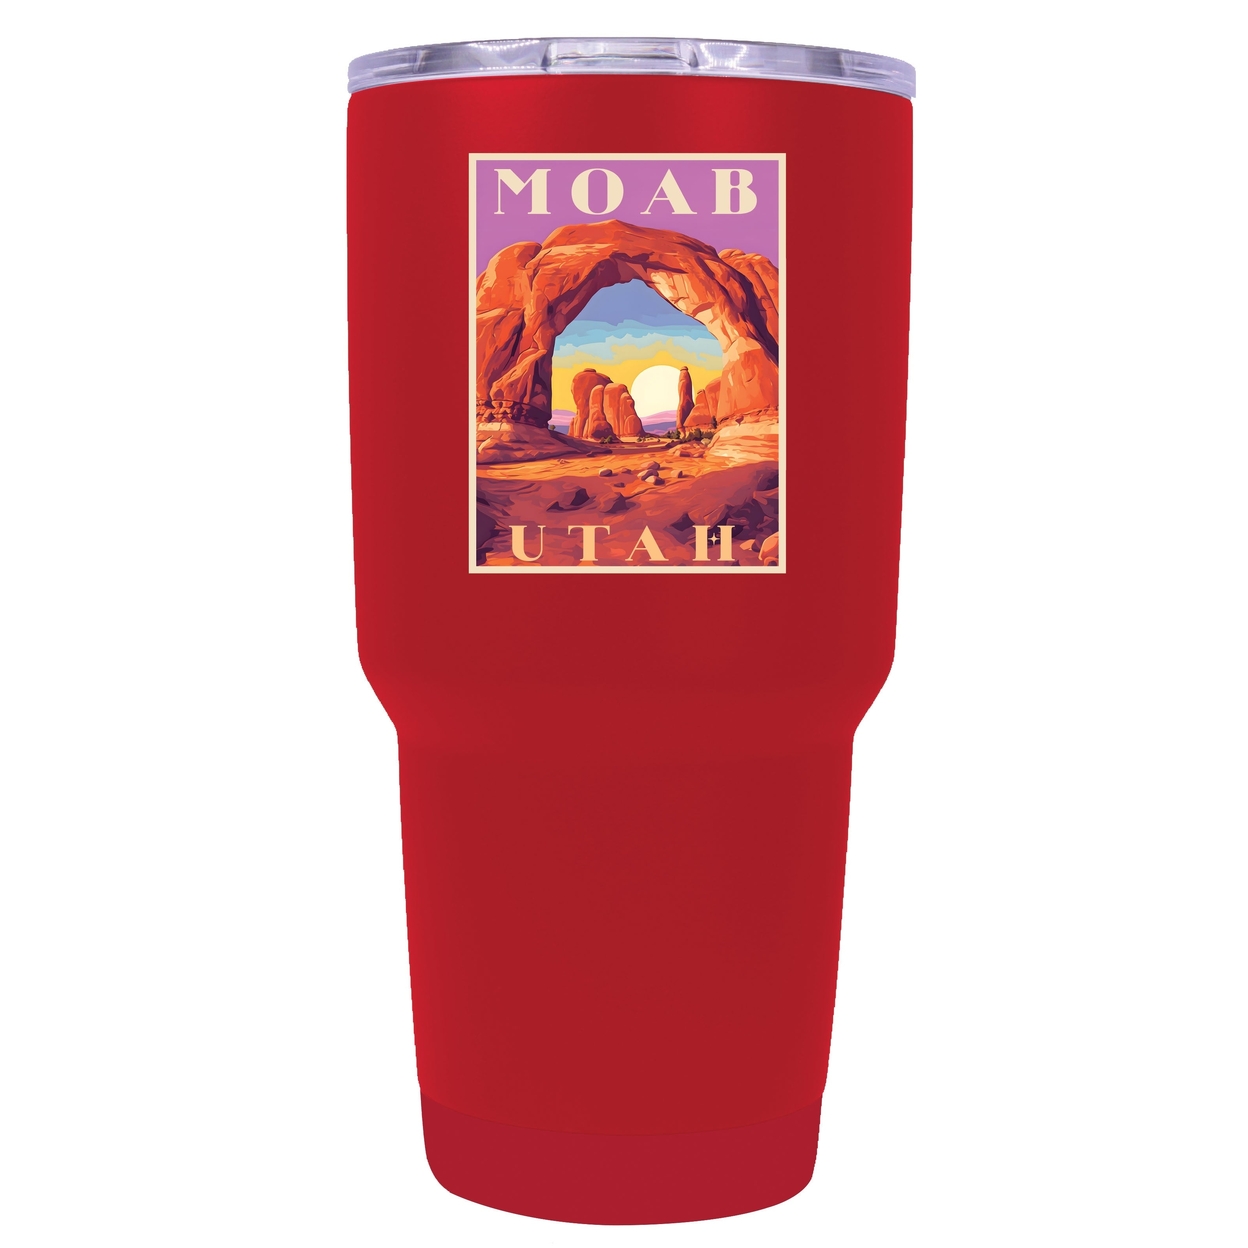 Moab Utah Souvenir 24 Oz Insulated Stainless Steel Tumbler - Red,,2-Pack